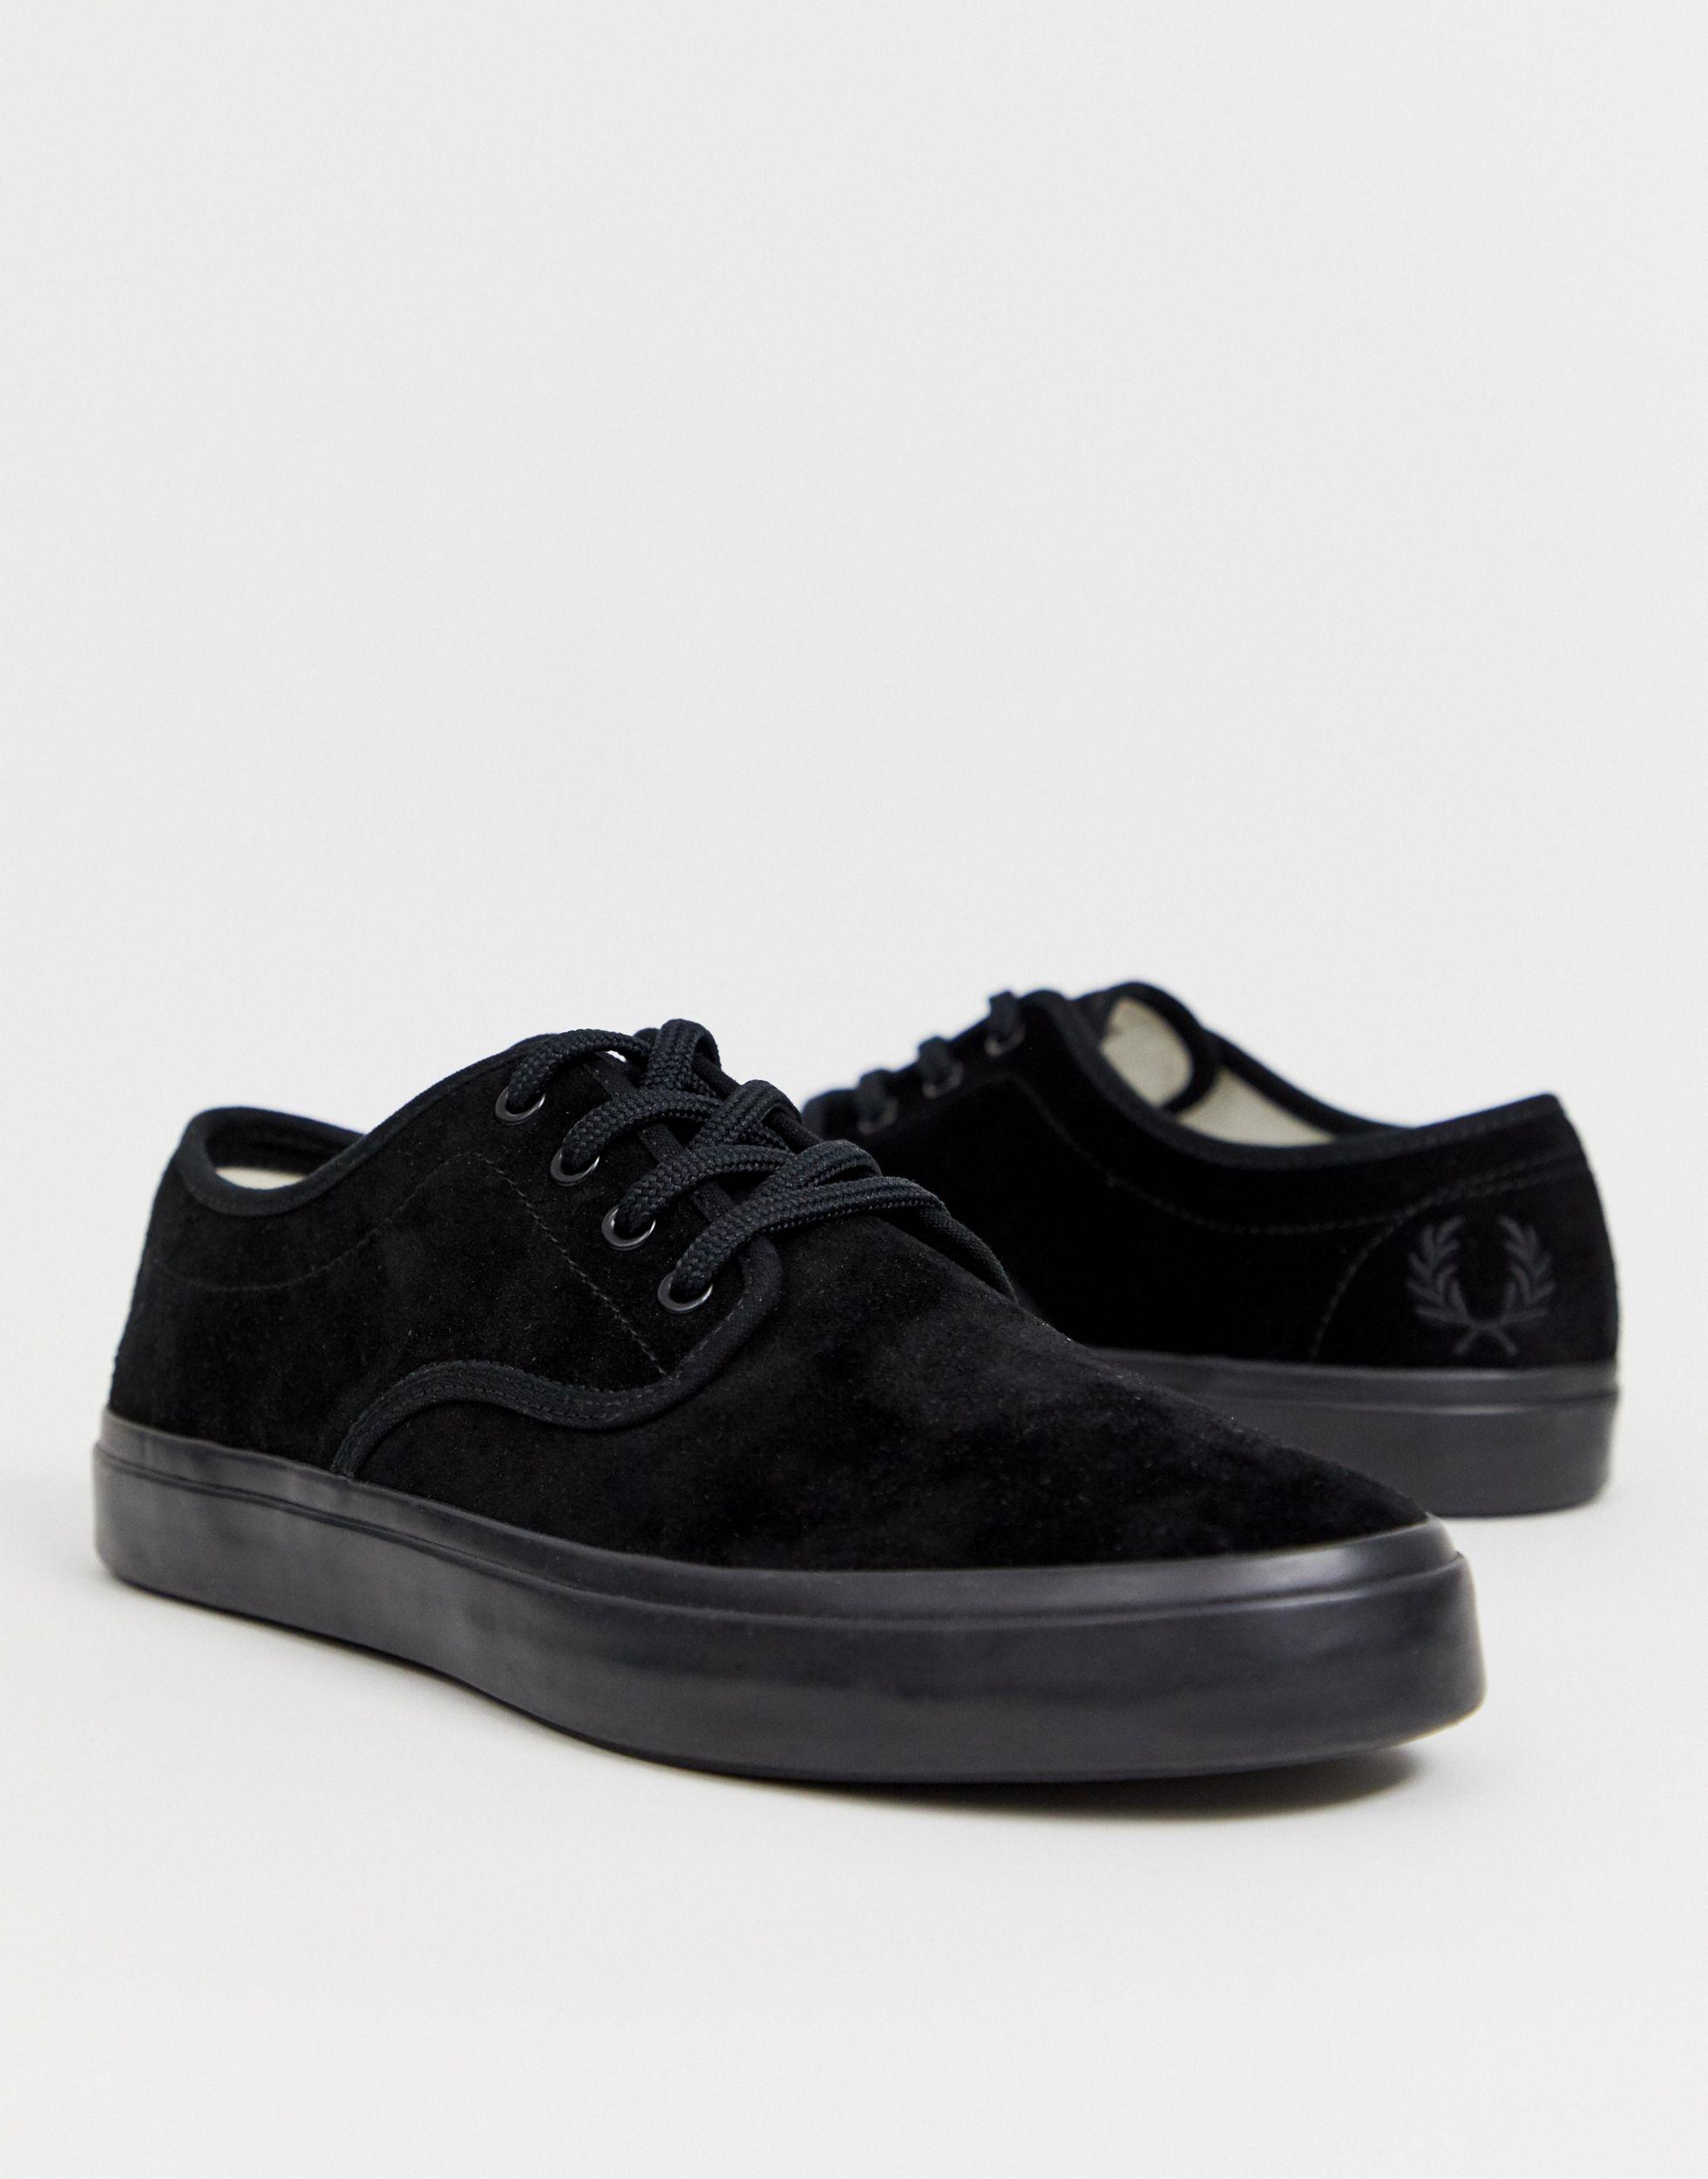 Fred Perry Merton Suede Trainers in Black for Men - Lyst